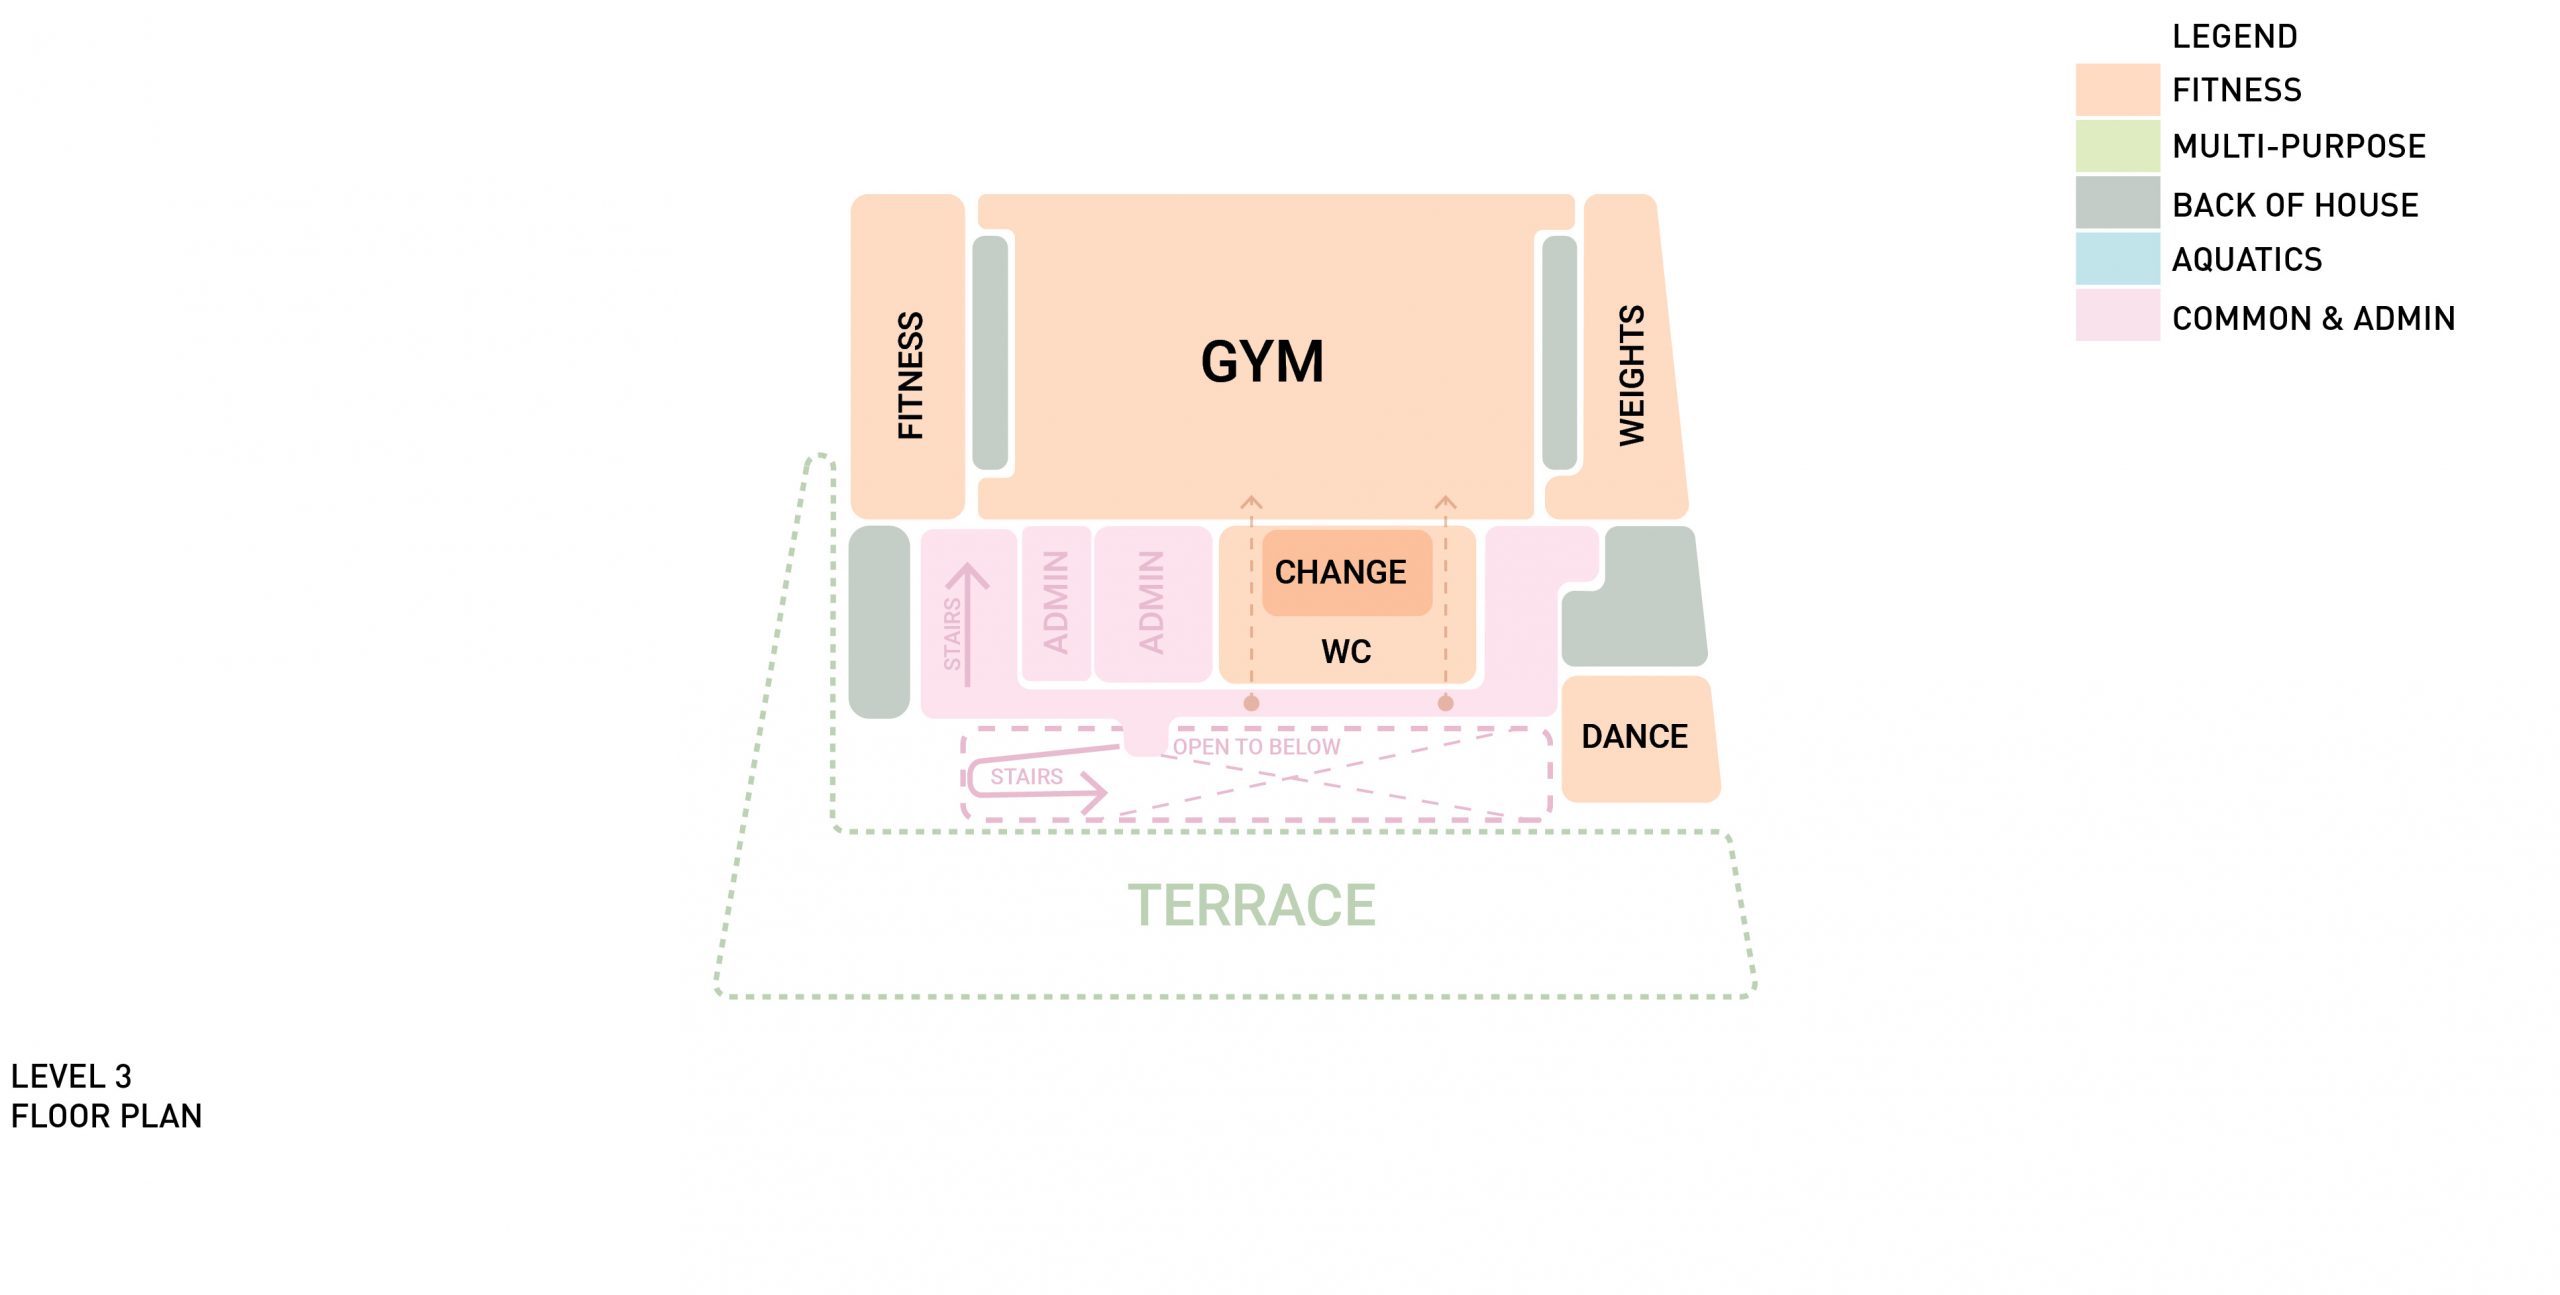 lan diagram detailing the program relationships at the third floor. The north portion contains a fitness room on the left, a weight room on the right with the gym in the center which can be accessed off a central corridor or through the change rooms. This level also contains admin spaces and a dance room at the south east corner that has views back into the atrium.